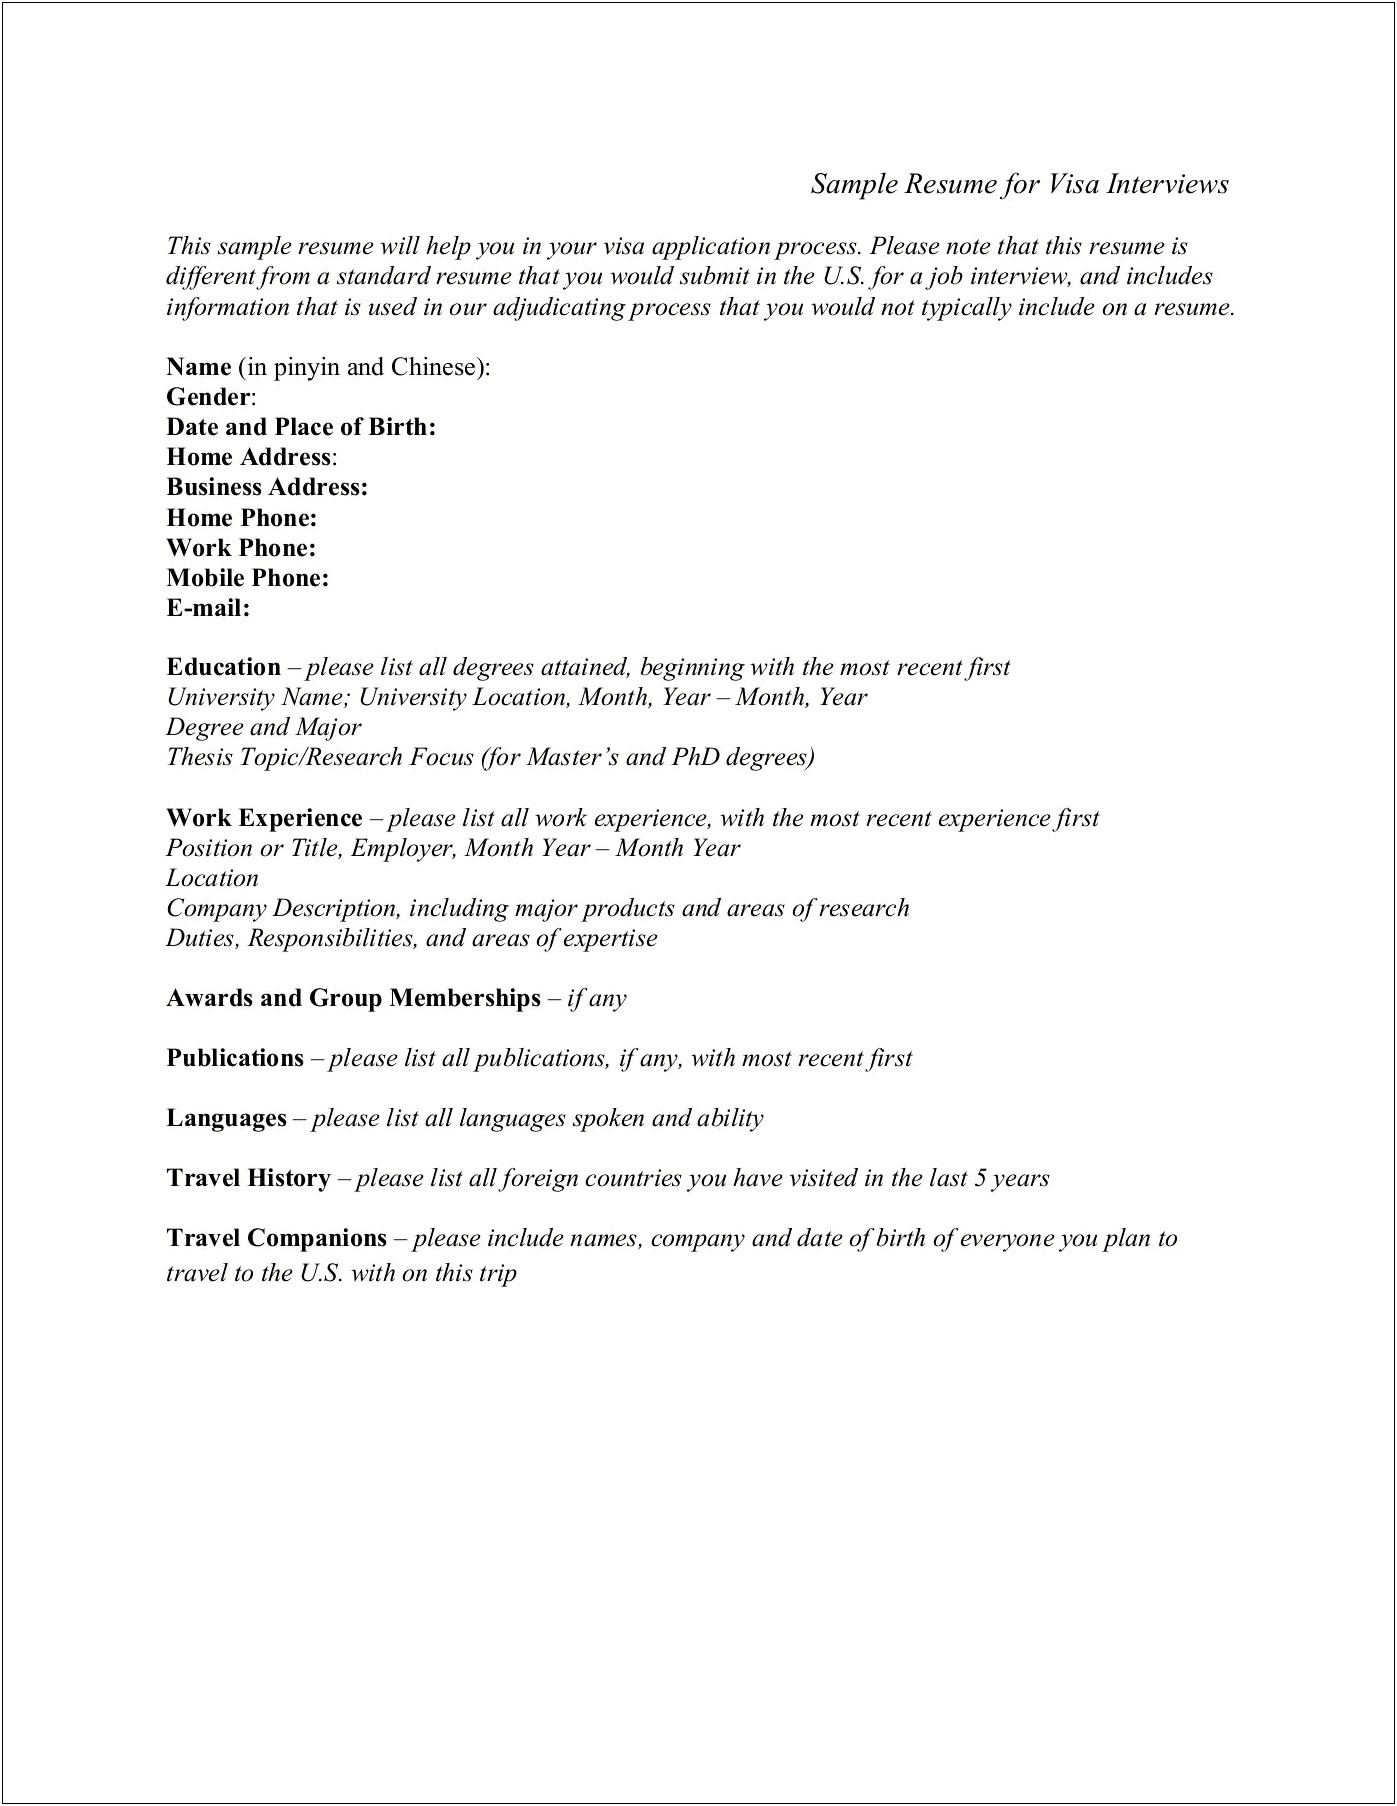 Resume With Visa Details Examples